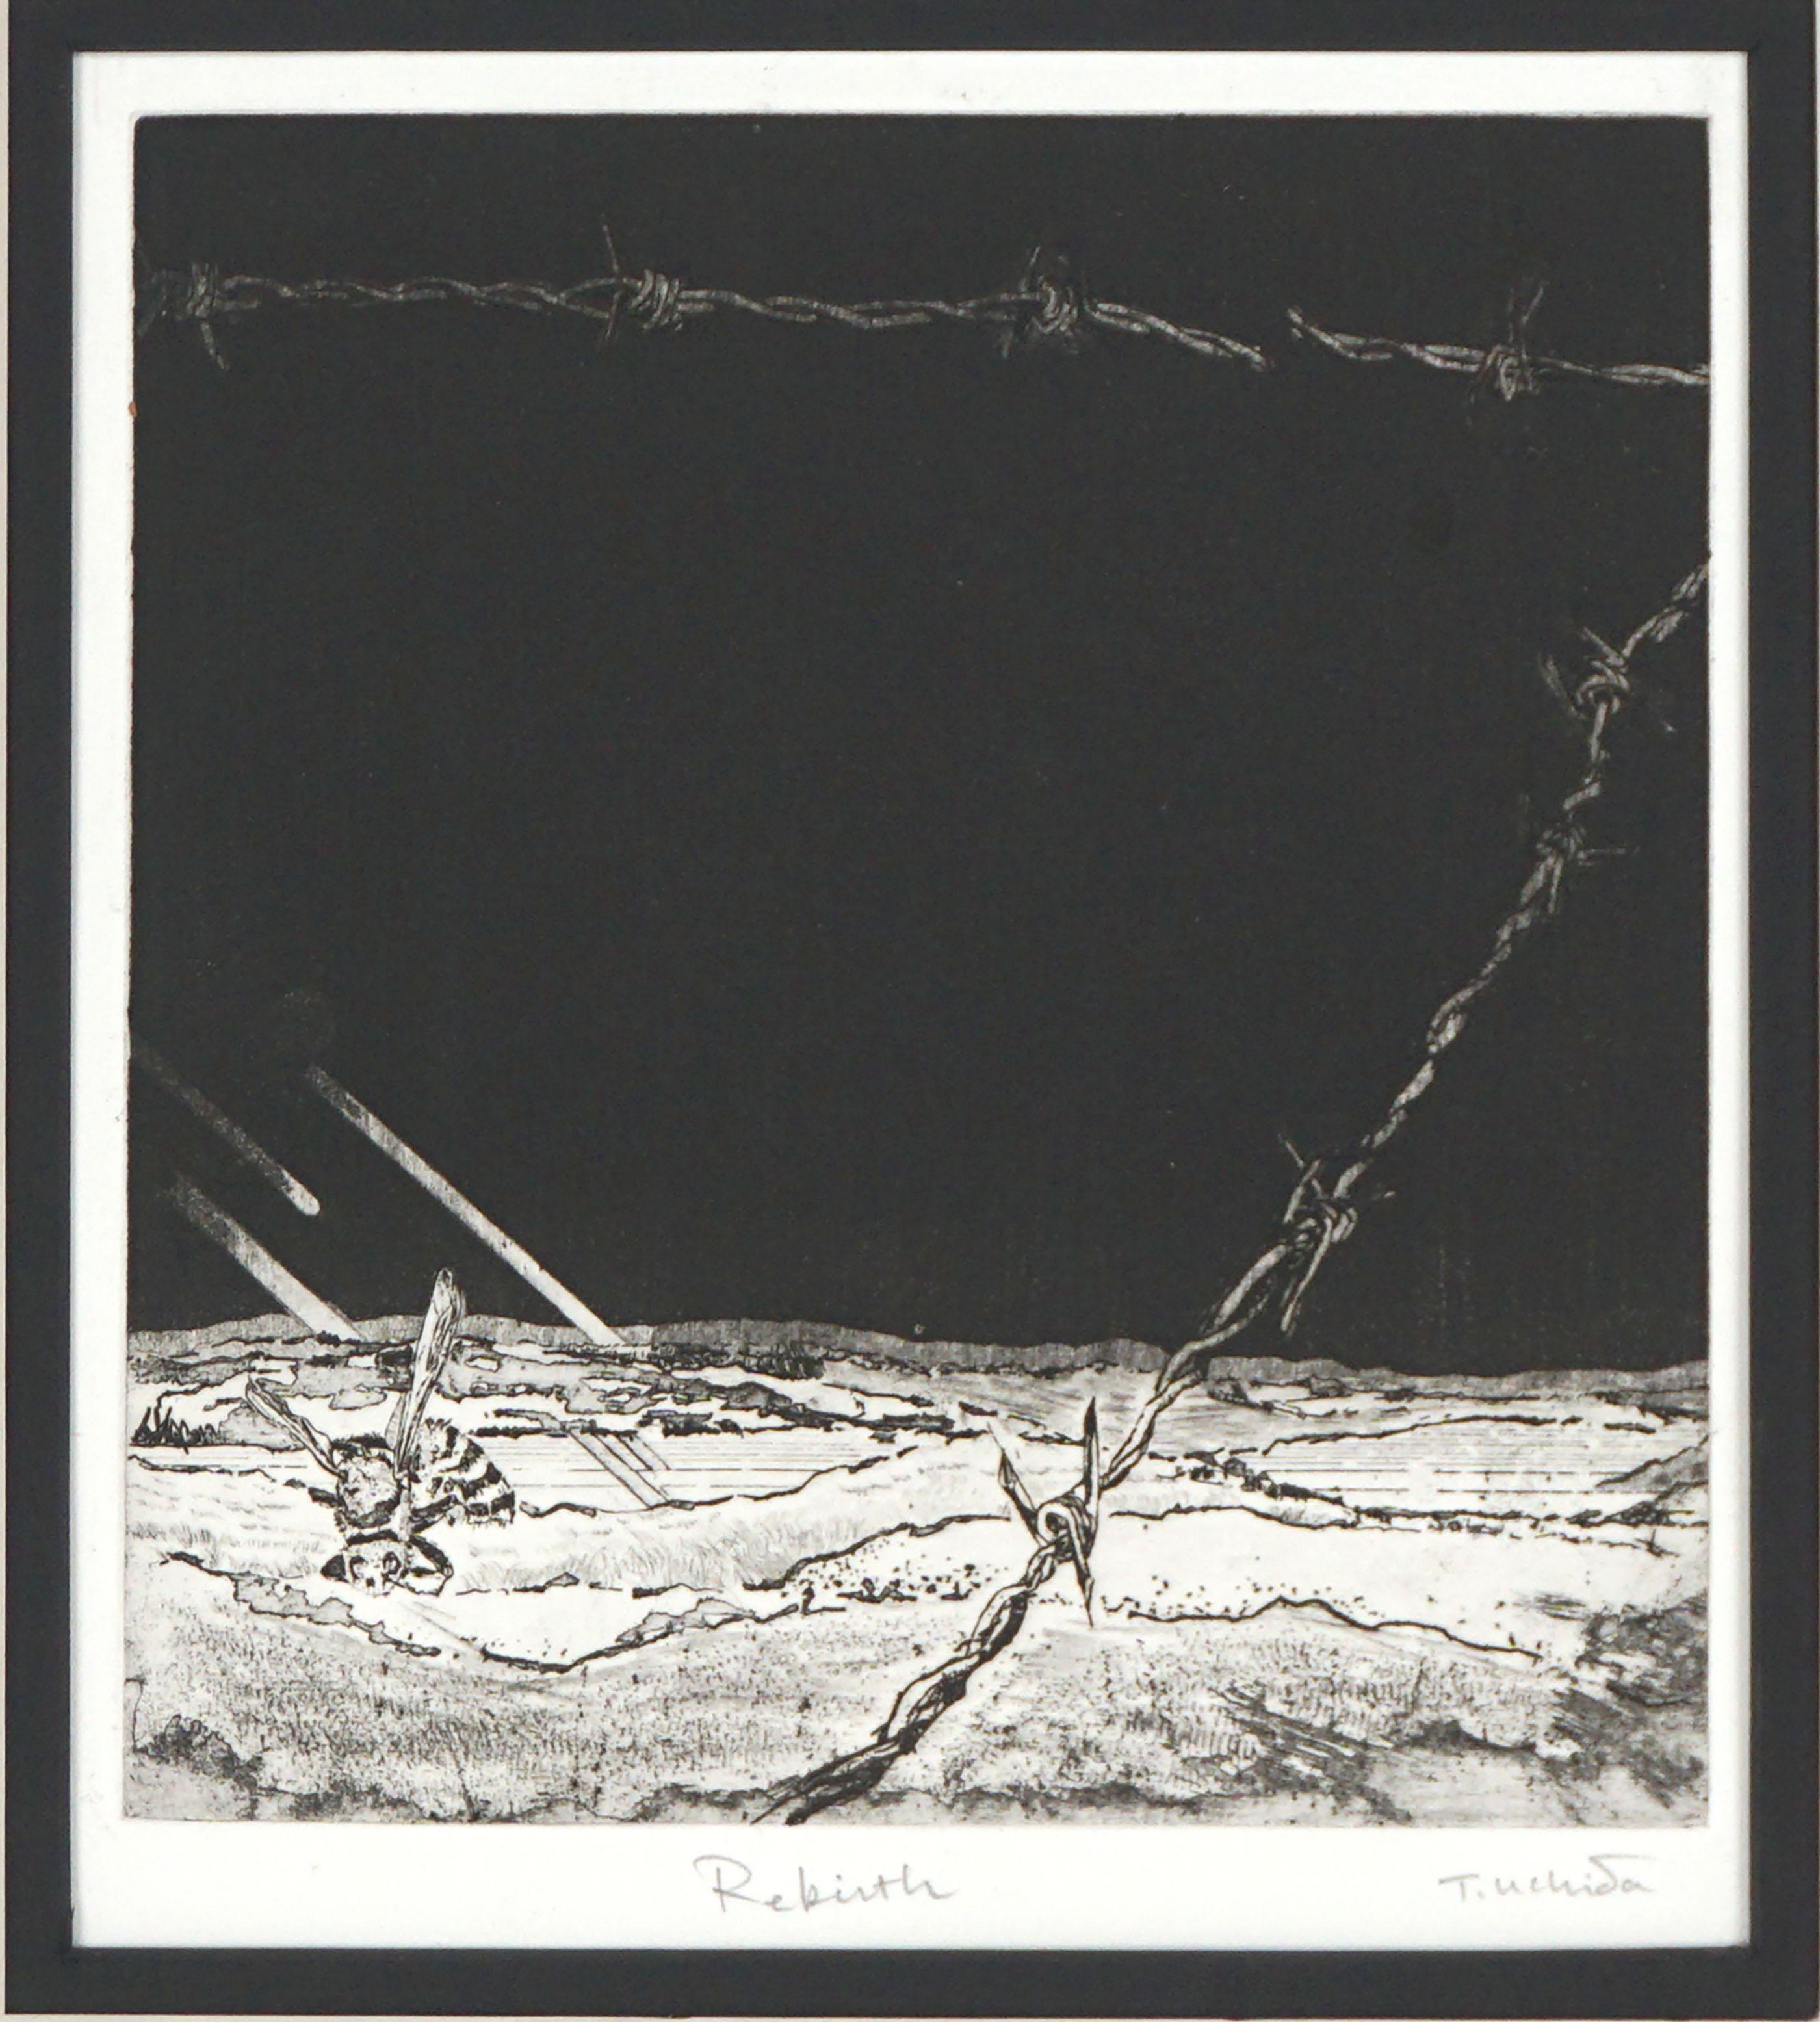 "Rebirth" Honey Bee and Barbed Wire - Gravure en taille-douce